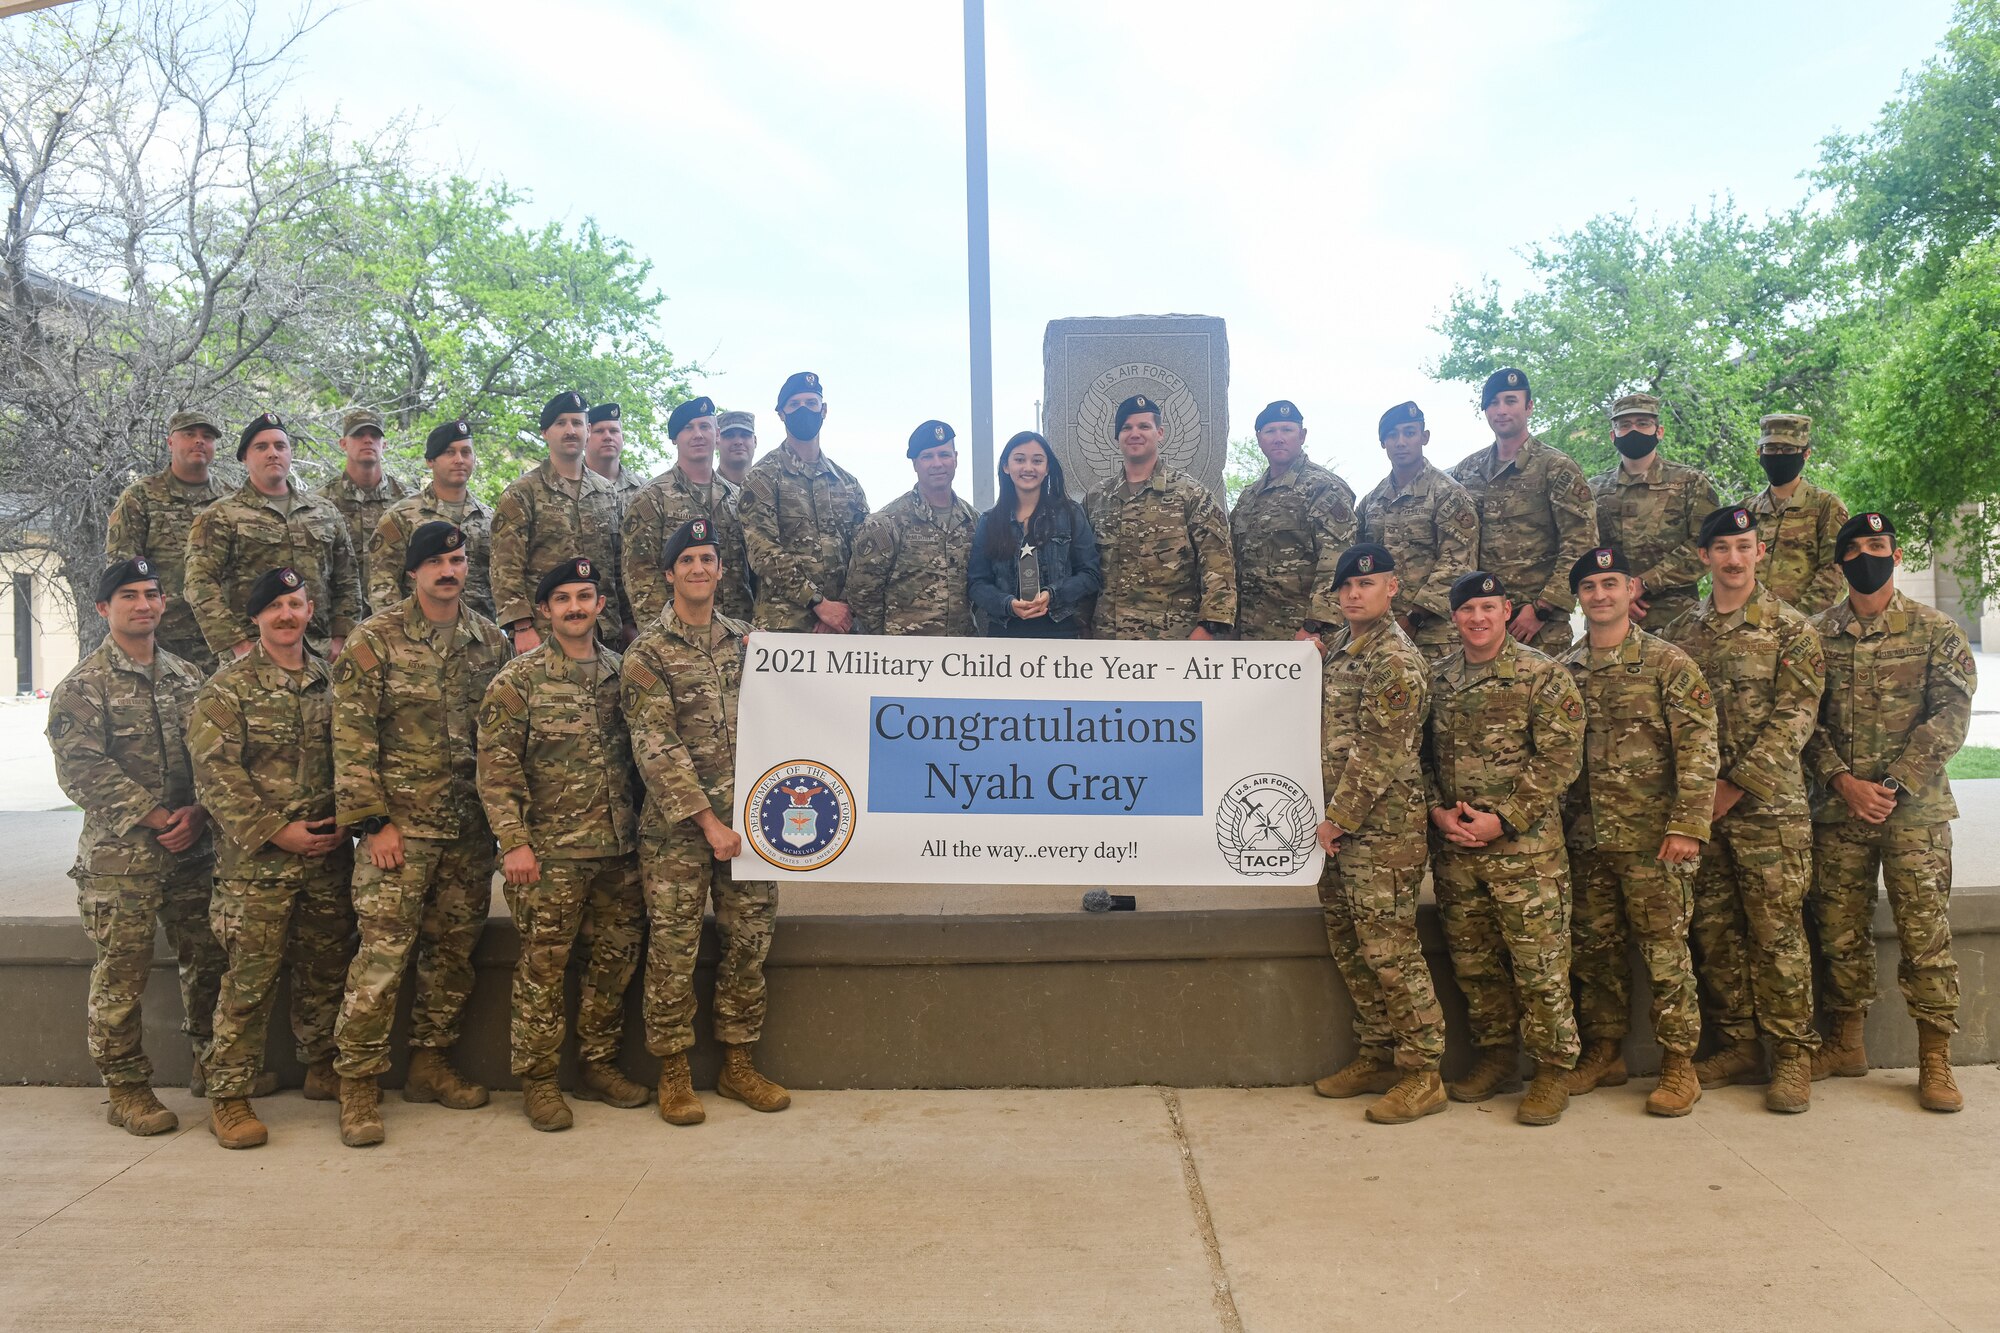 The 353rd Training Squadron, Special Warfare Training Wing, honored Nyah Gray, the 2021 Military Child of the Year® for the Air Force, during an Air Force Tactical Air Control Party, TACP, "Final Formation" ceremony at Joint Base San Antonio-Chapman Training Annex, Texas Apr. 2, 2021.